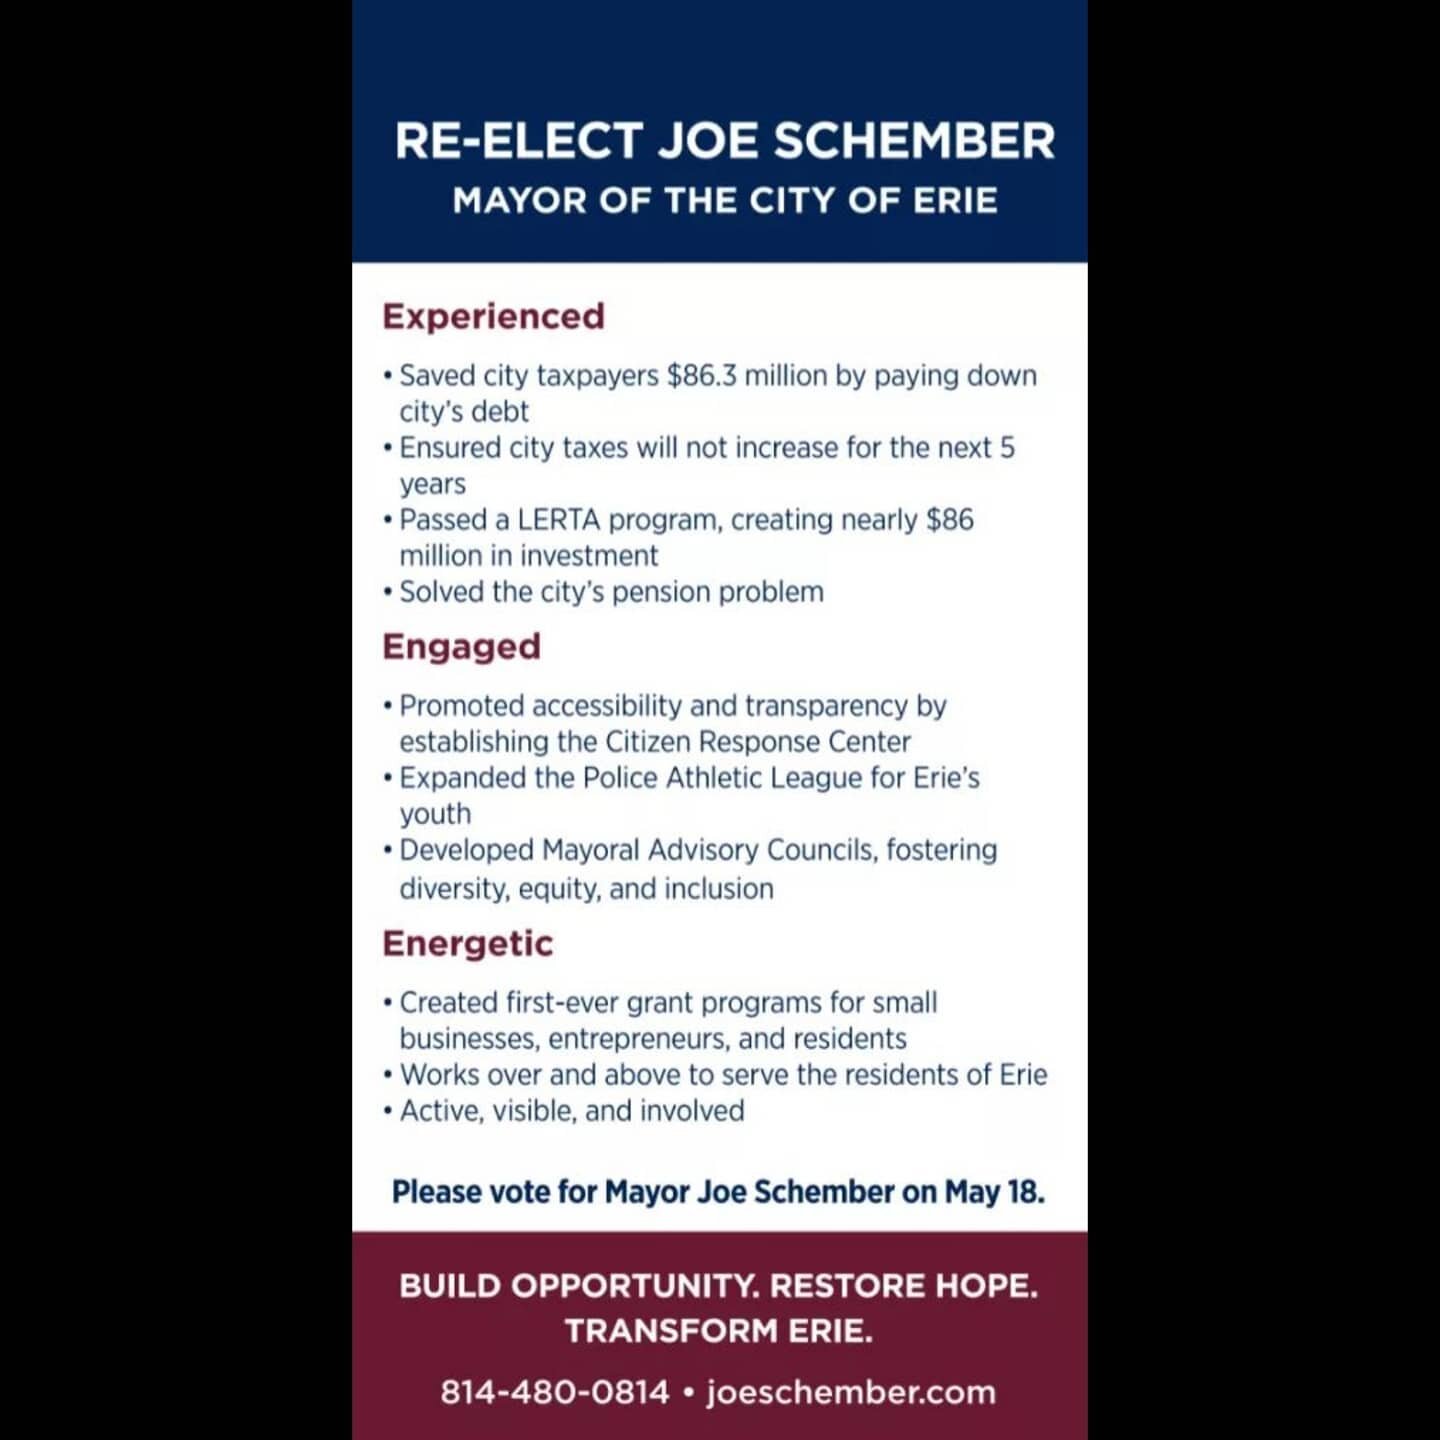 Here are some of the accomplishments my team and I have had over the past 3 1/2 years. We hope to earn your vote on Tuesday May 18th to keep working hard and serving all the people of Erie. 

#teamschember #rememberschember #eriepa #ReElect #4moreyea